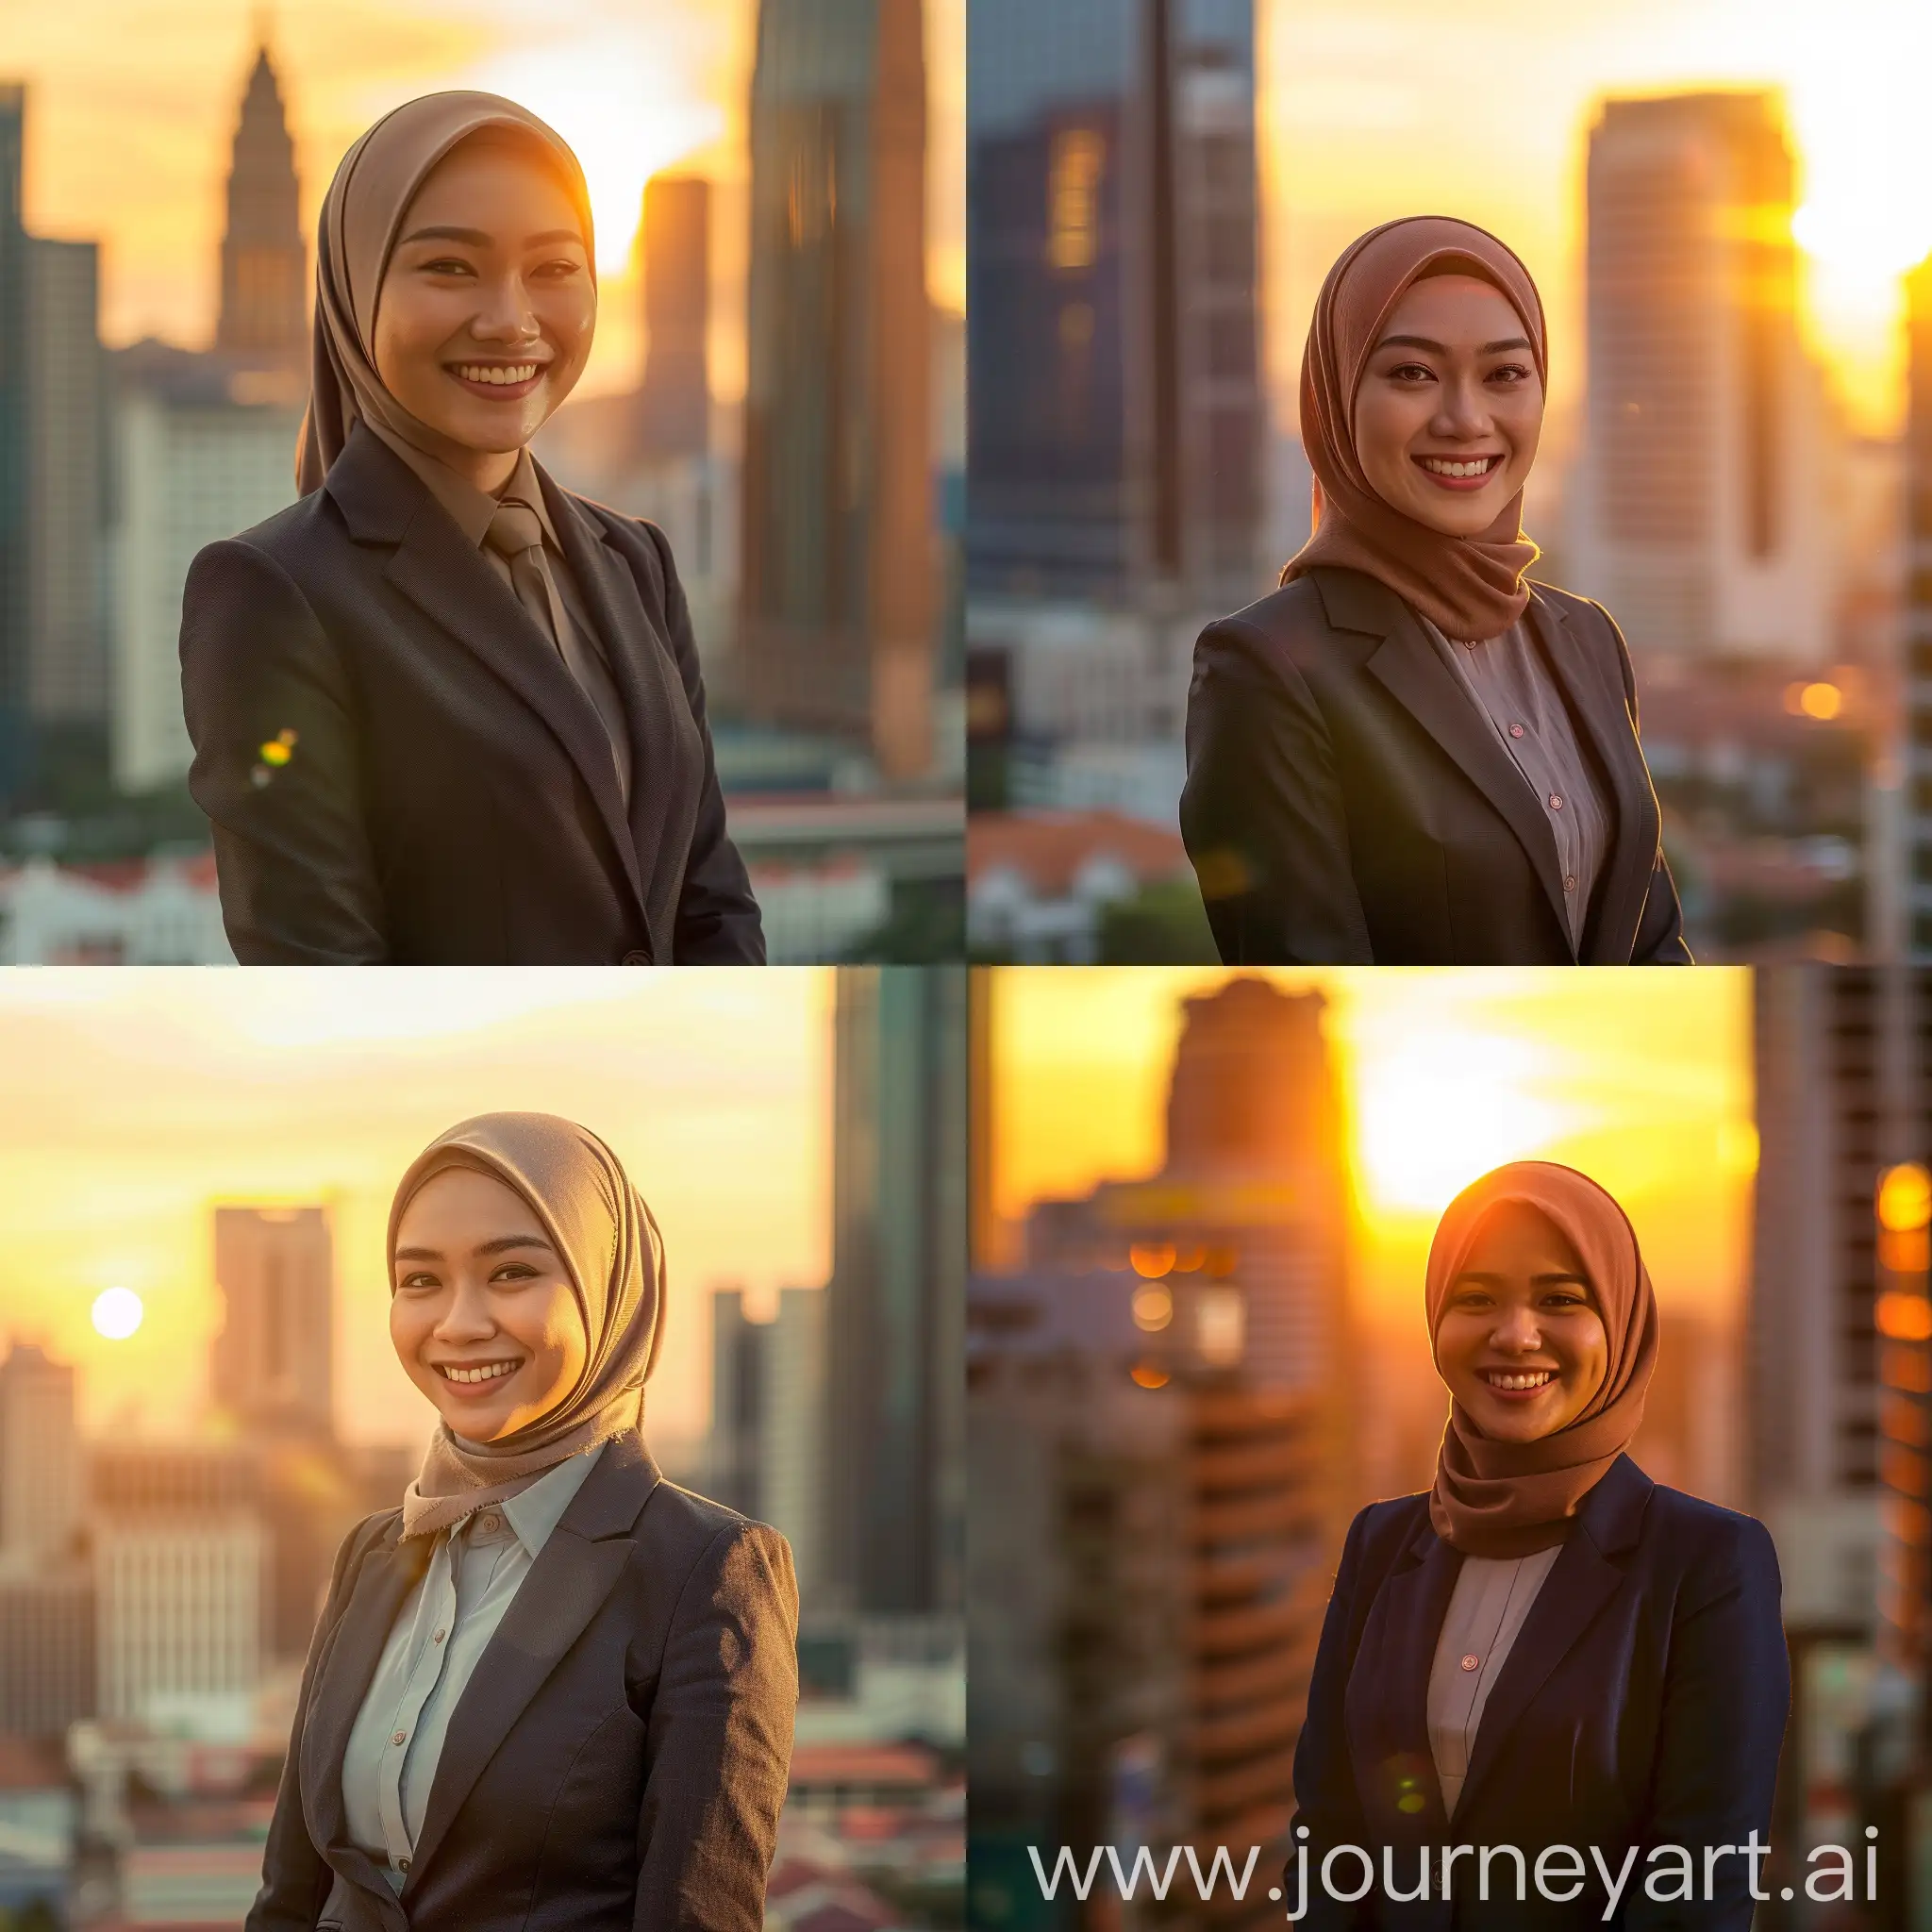 A photograph of a confident smiling malay muslimah  in sleek business attire, framed against a vibrant cityscape at golden hour. The warm tones of the setting sun cast a flattering glow on her face, emphasizing her inner strength and determination. The composition accentuates her posture, with strong leading lines and a dynamic angle of view, capturing her in a moment of triumph amidst the bustling urban environment.